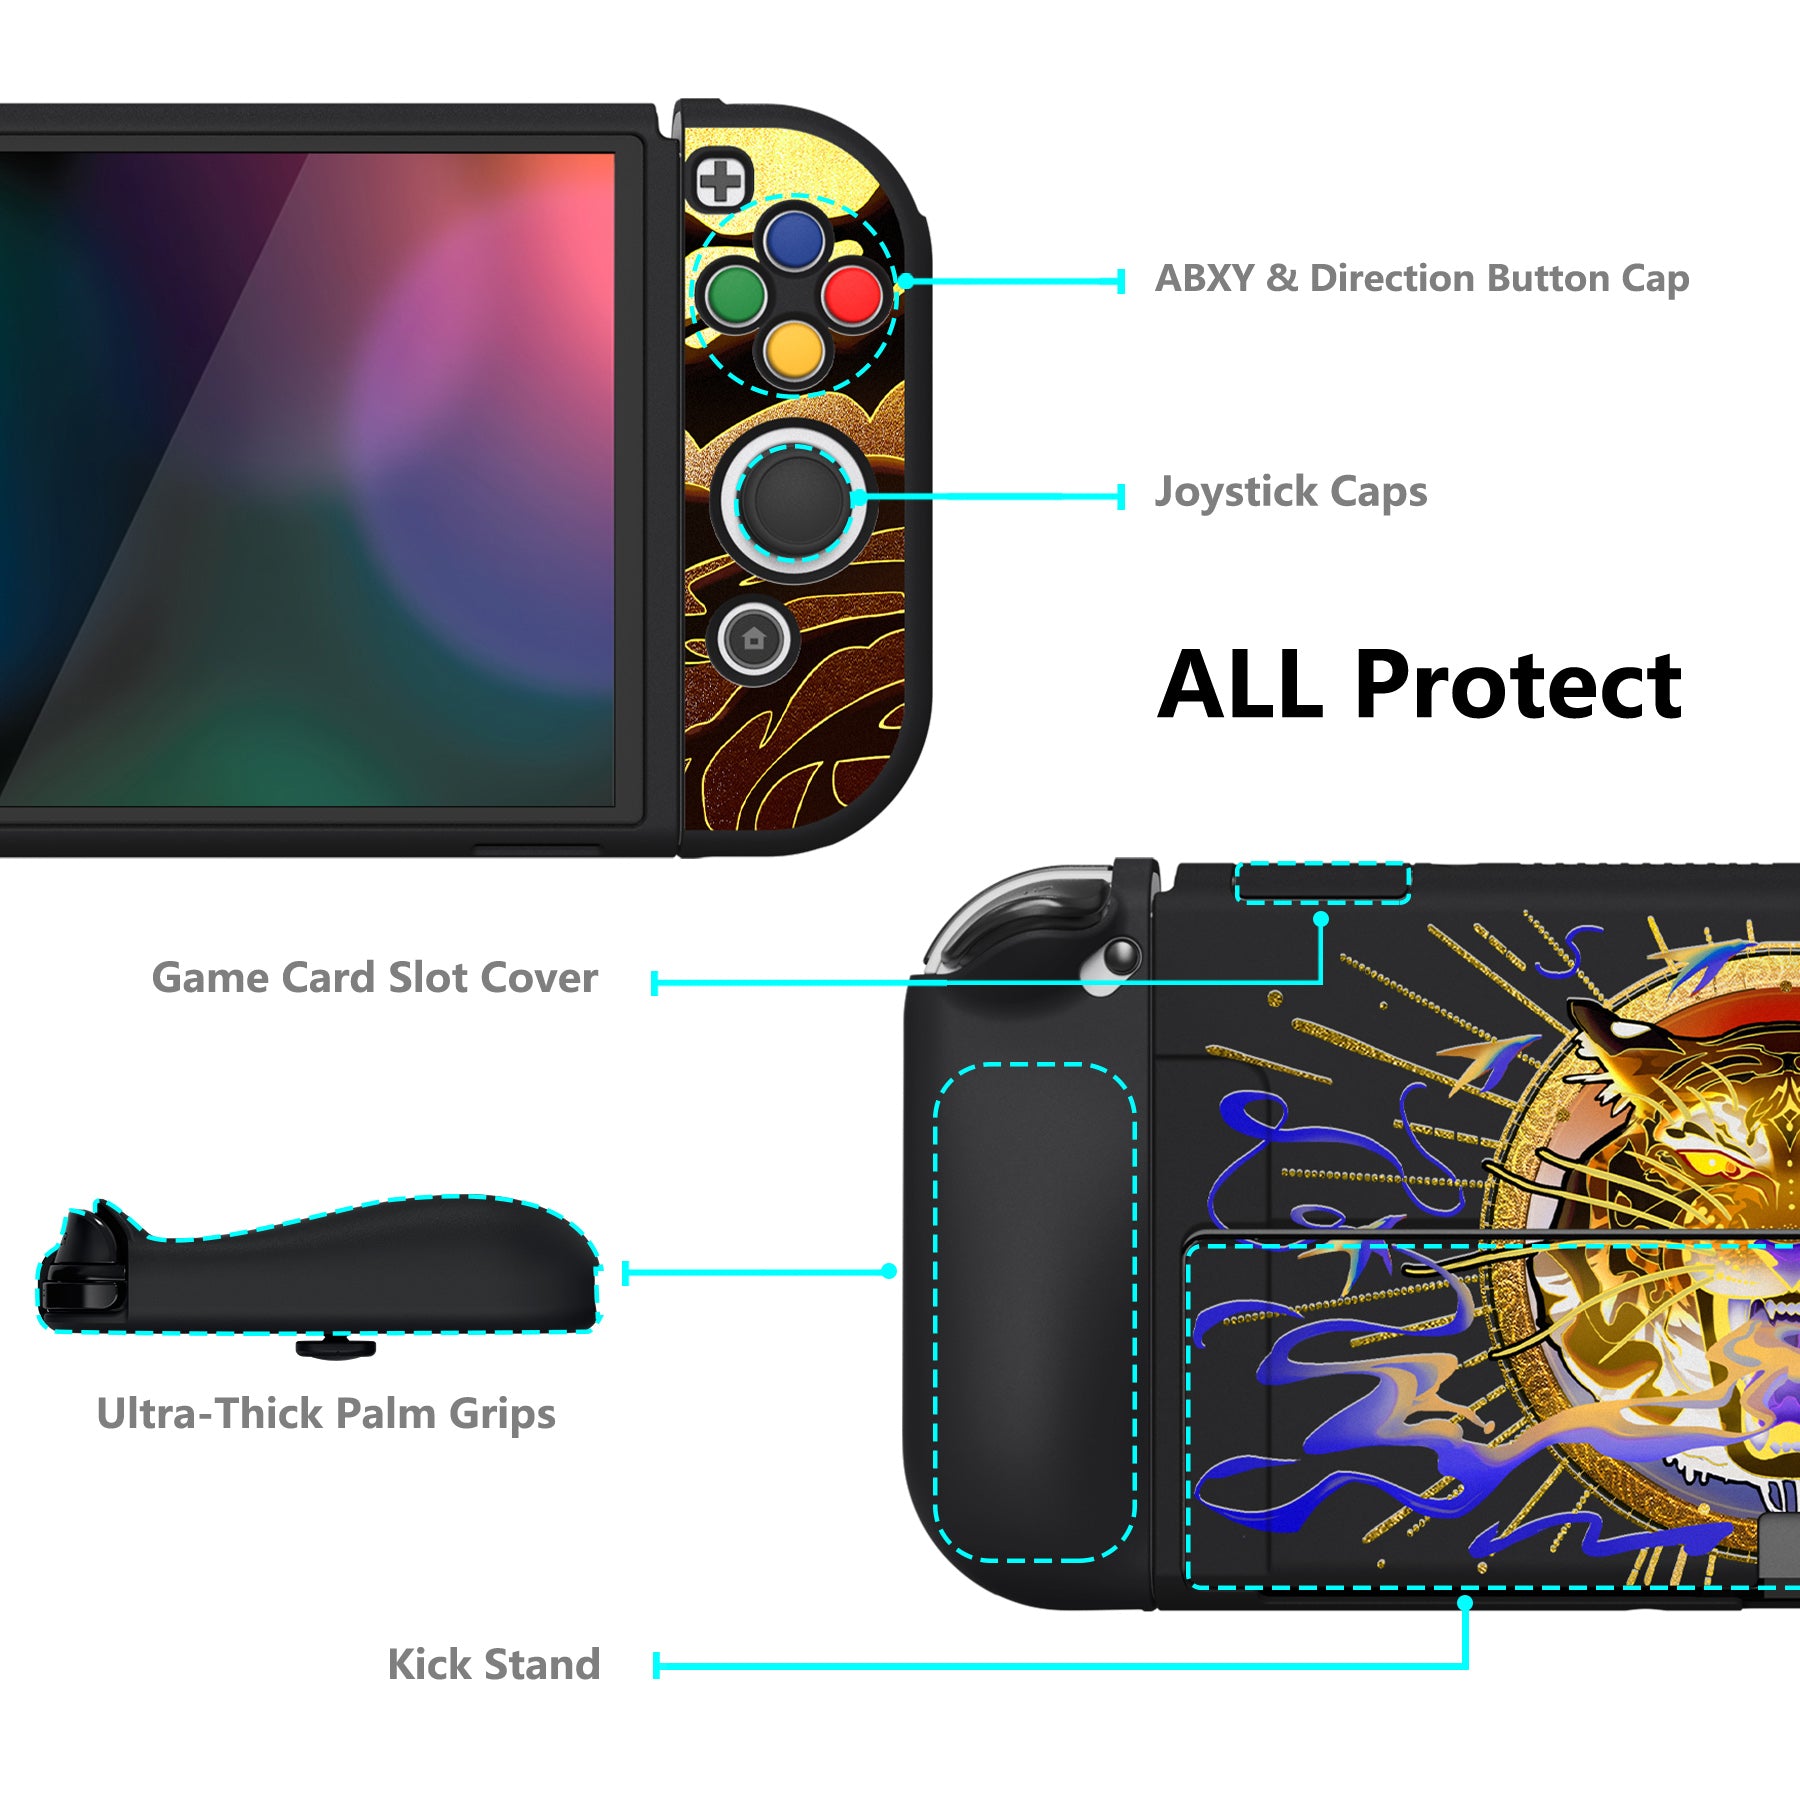 PlayVital ZealProtect Soft Protective Case for Switch OLED, Flexible Protector Joycon Grip Cover for Switch OLED with Thumb Grip Caps & ABXY Direction Button Caps - Tiger Tarot - XSOYV6033 playvital